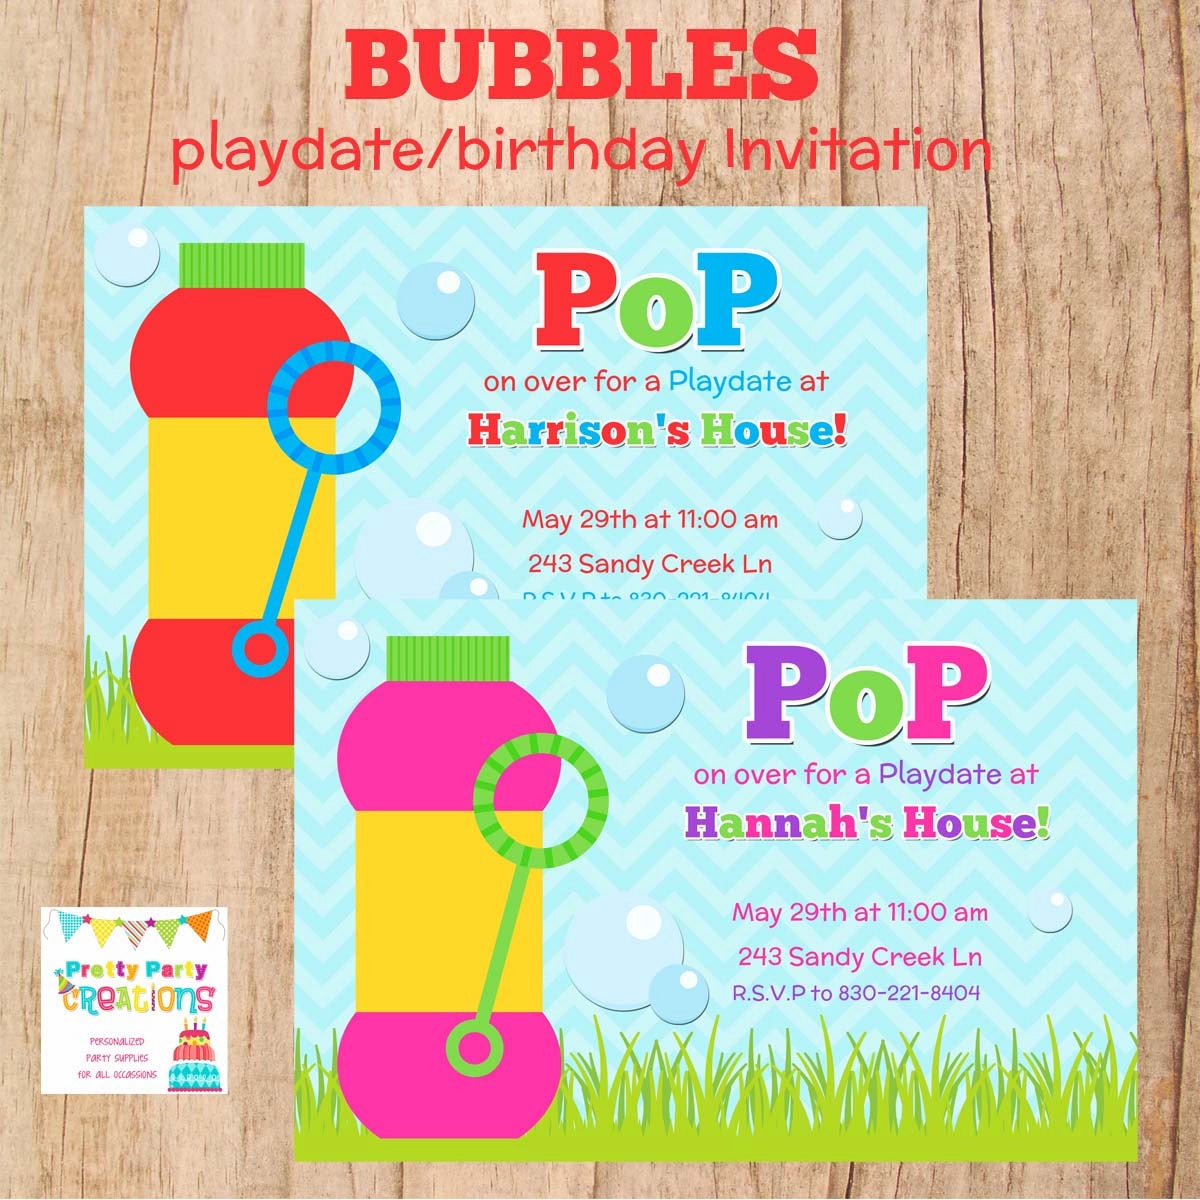 bubbles-playdate-or-birthday-invitation-2-to-choose-you-etsy